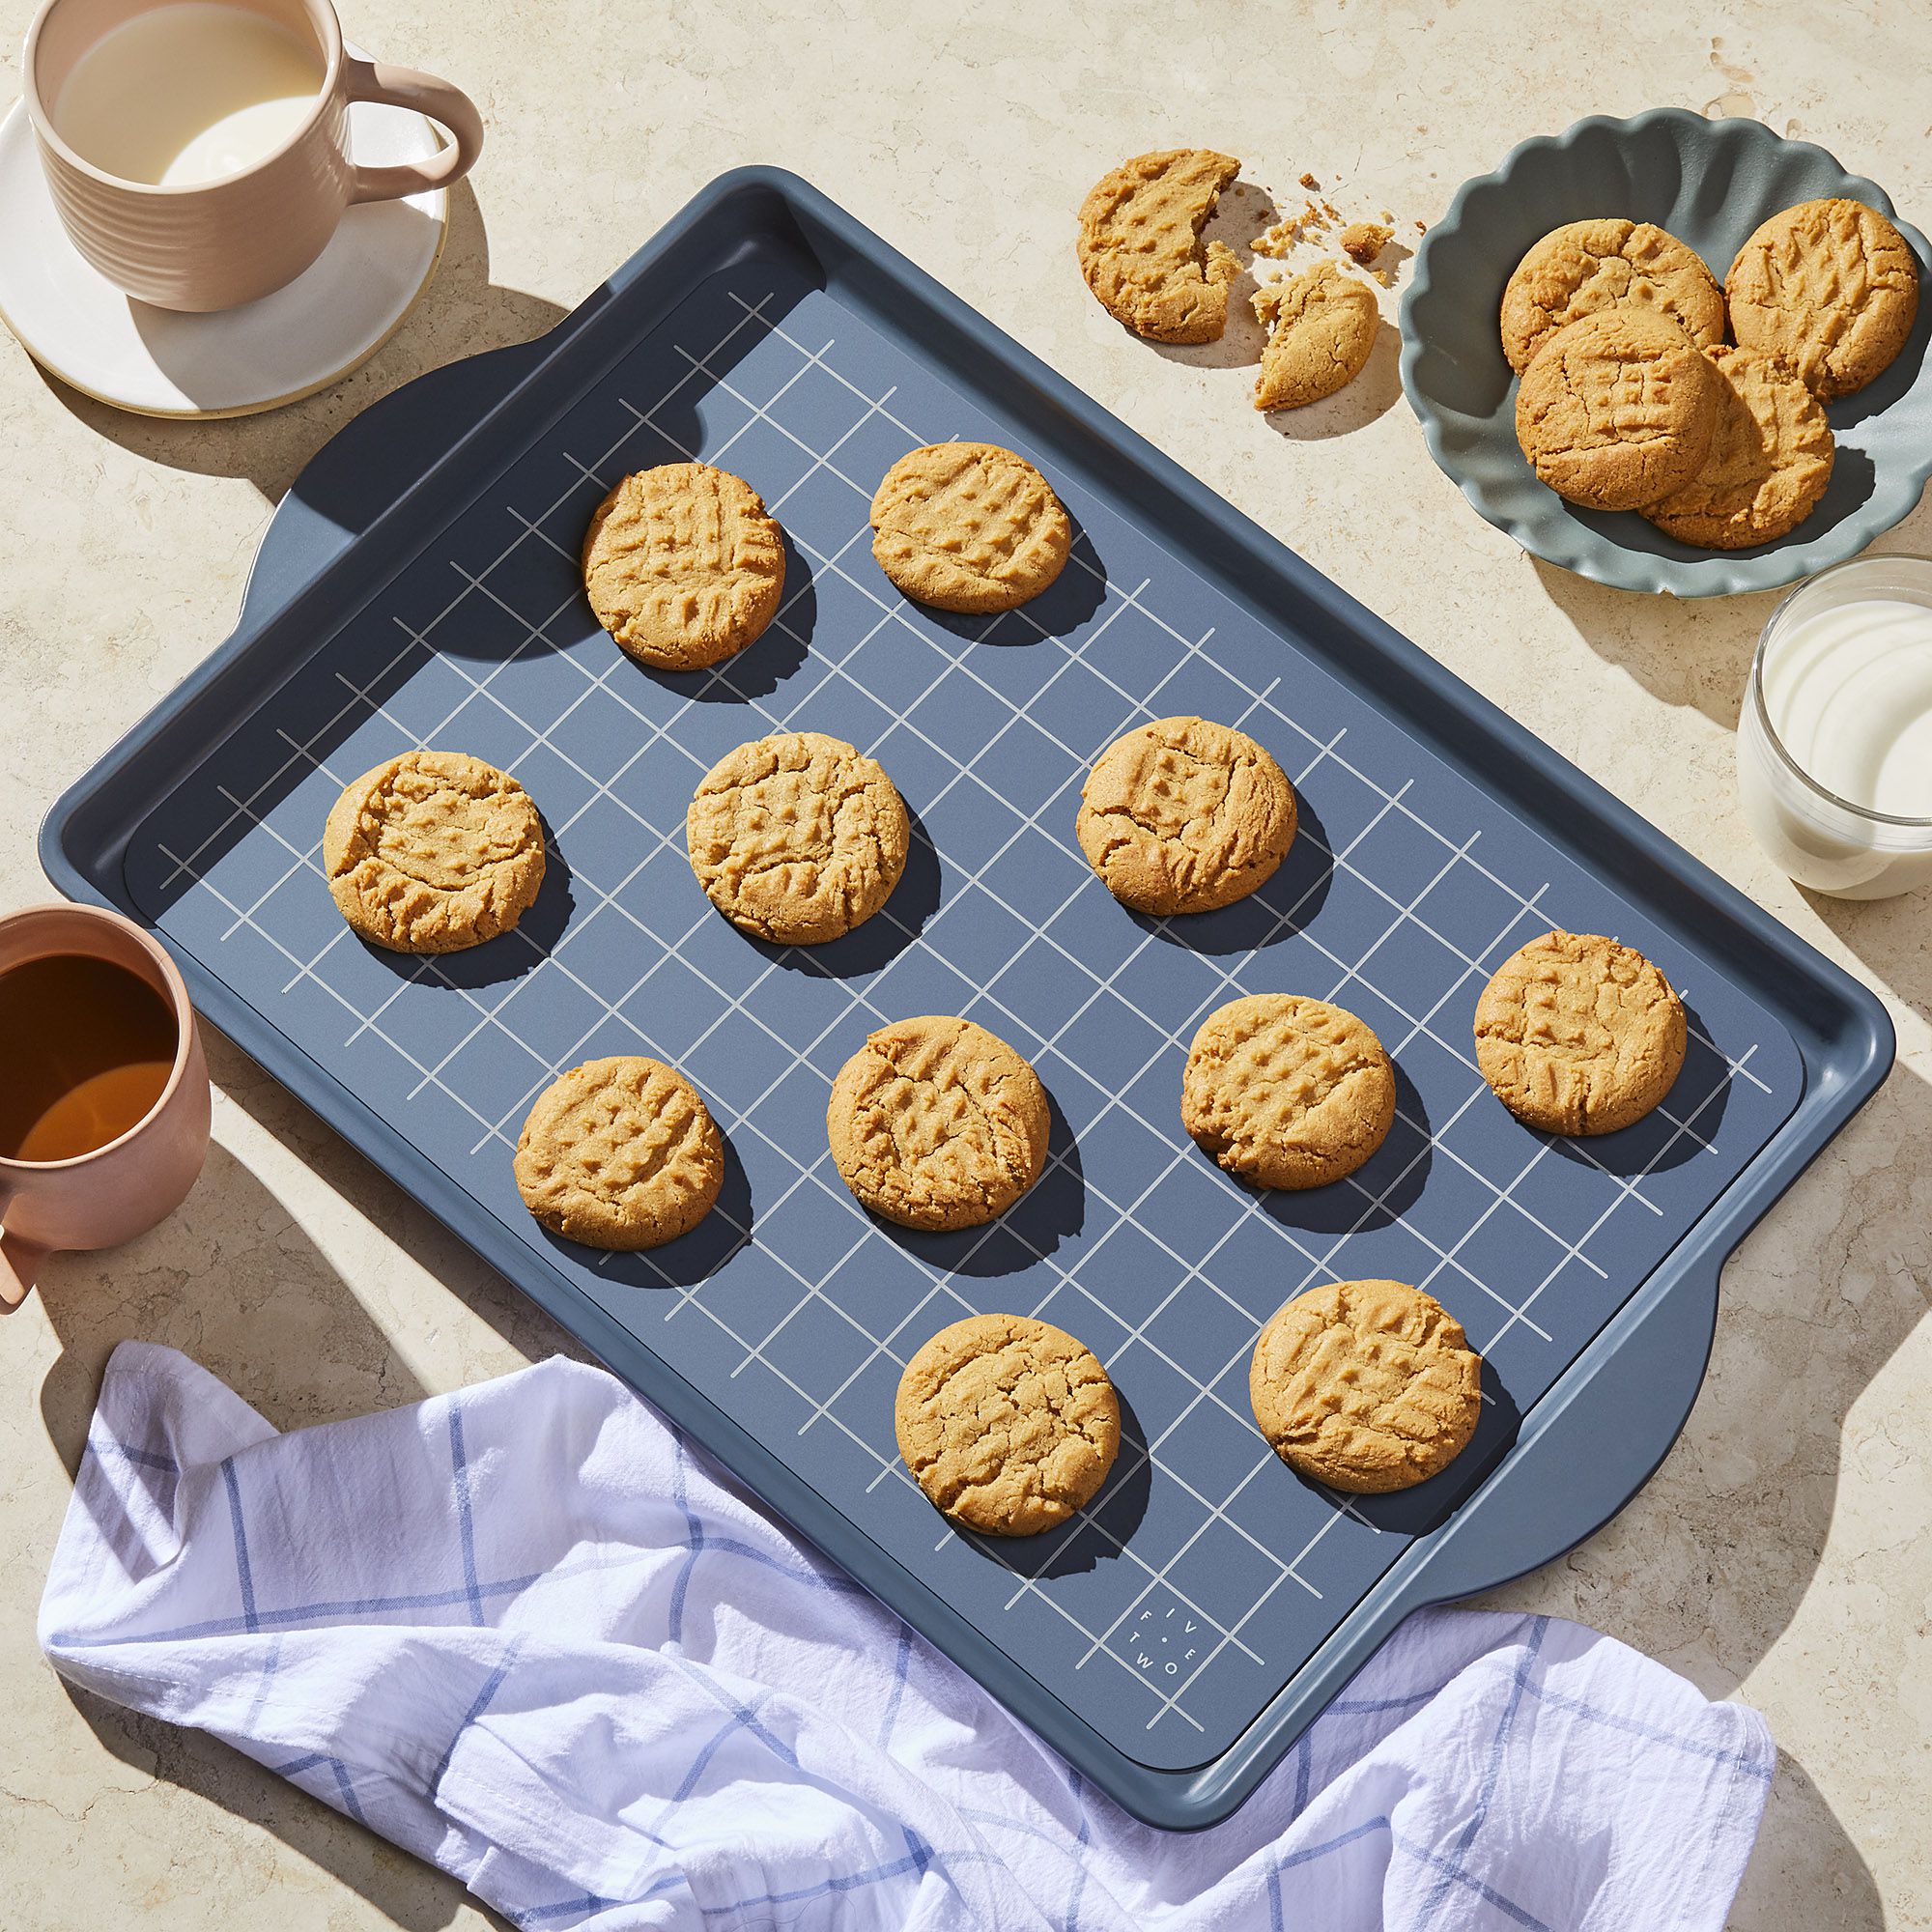 3 Piece Baking Set, Aluminum Half Sheet, Cooling Grid, Silicone Baking Mat,  12 x 18, The Pioneer Woman 